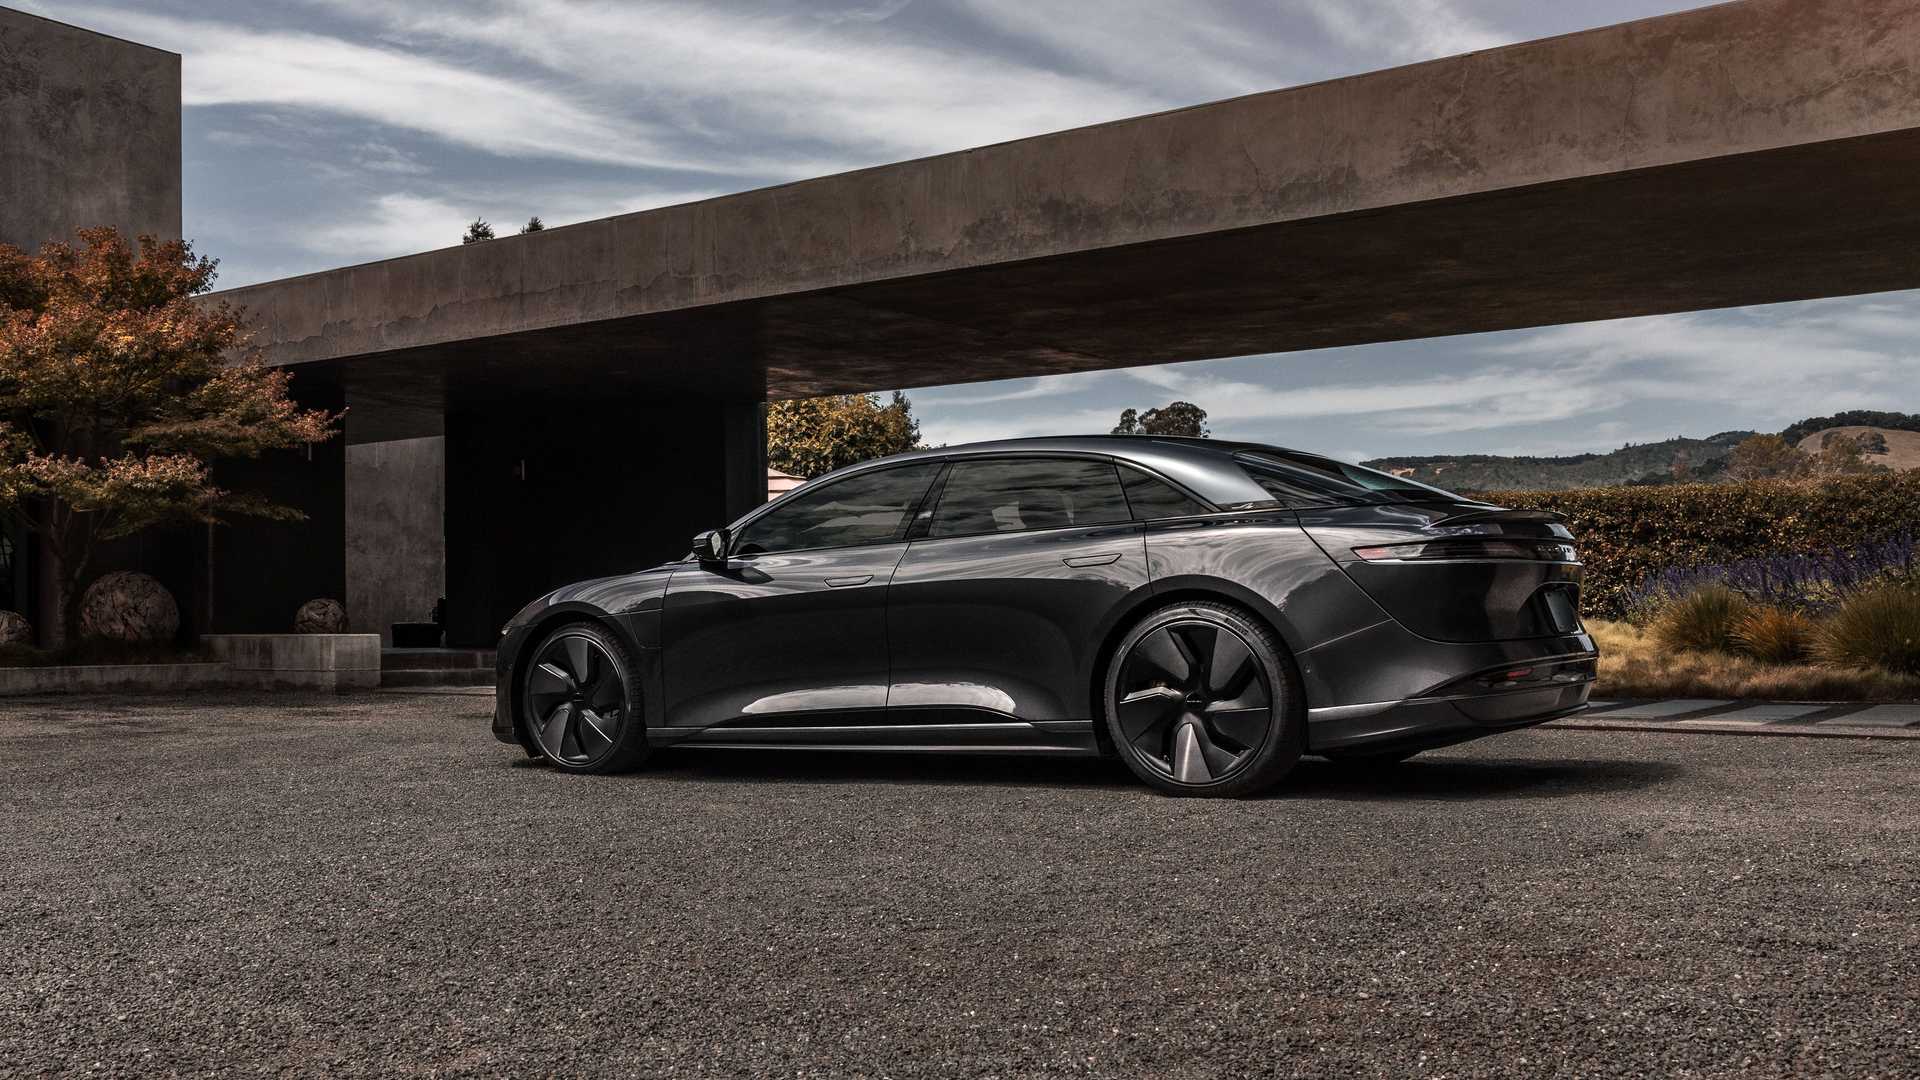 lucid air price cuts are working, sales on the rise, ceo says